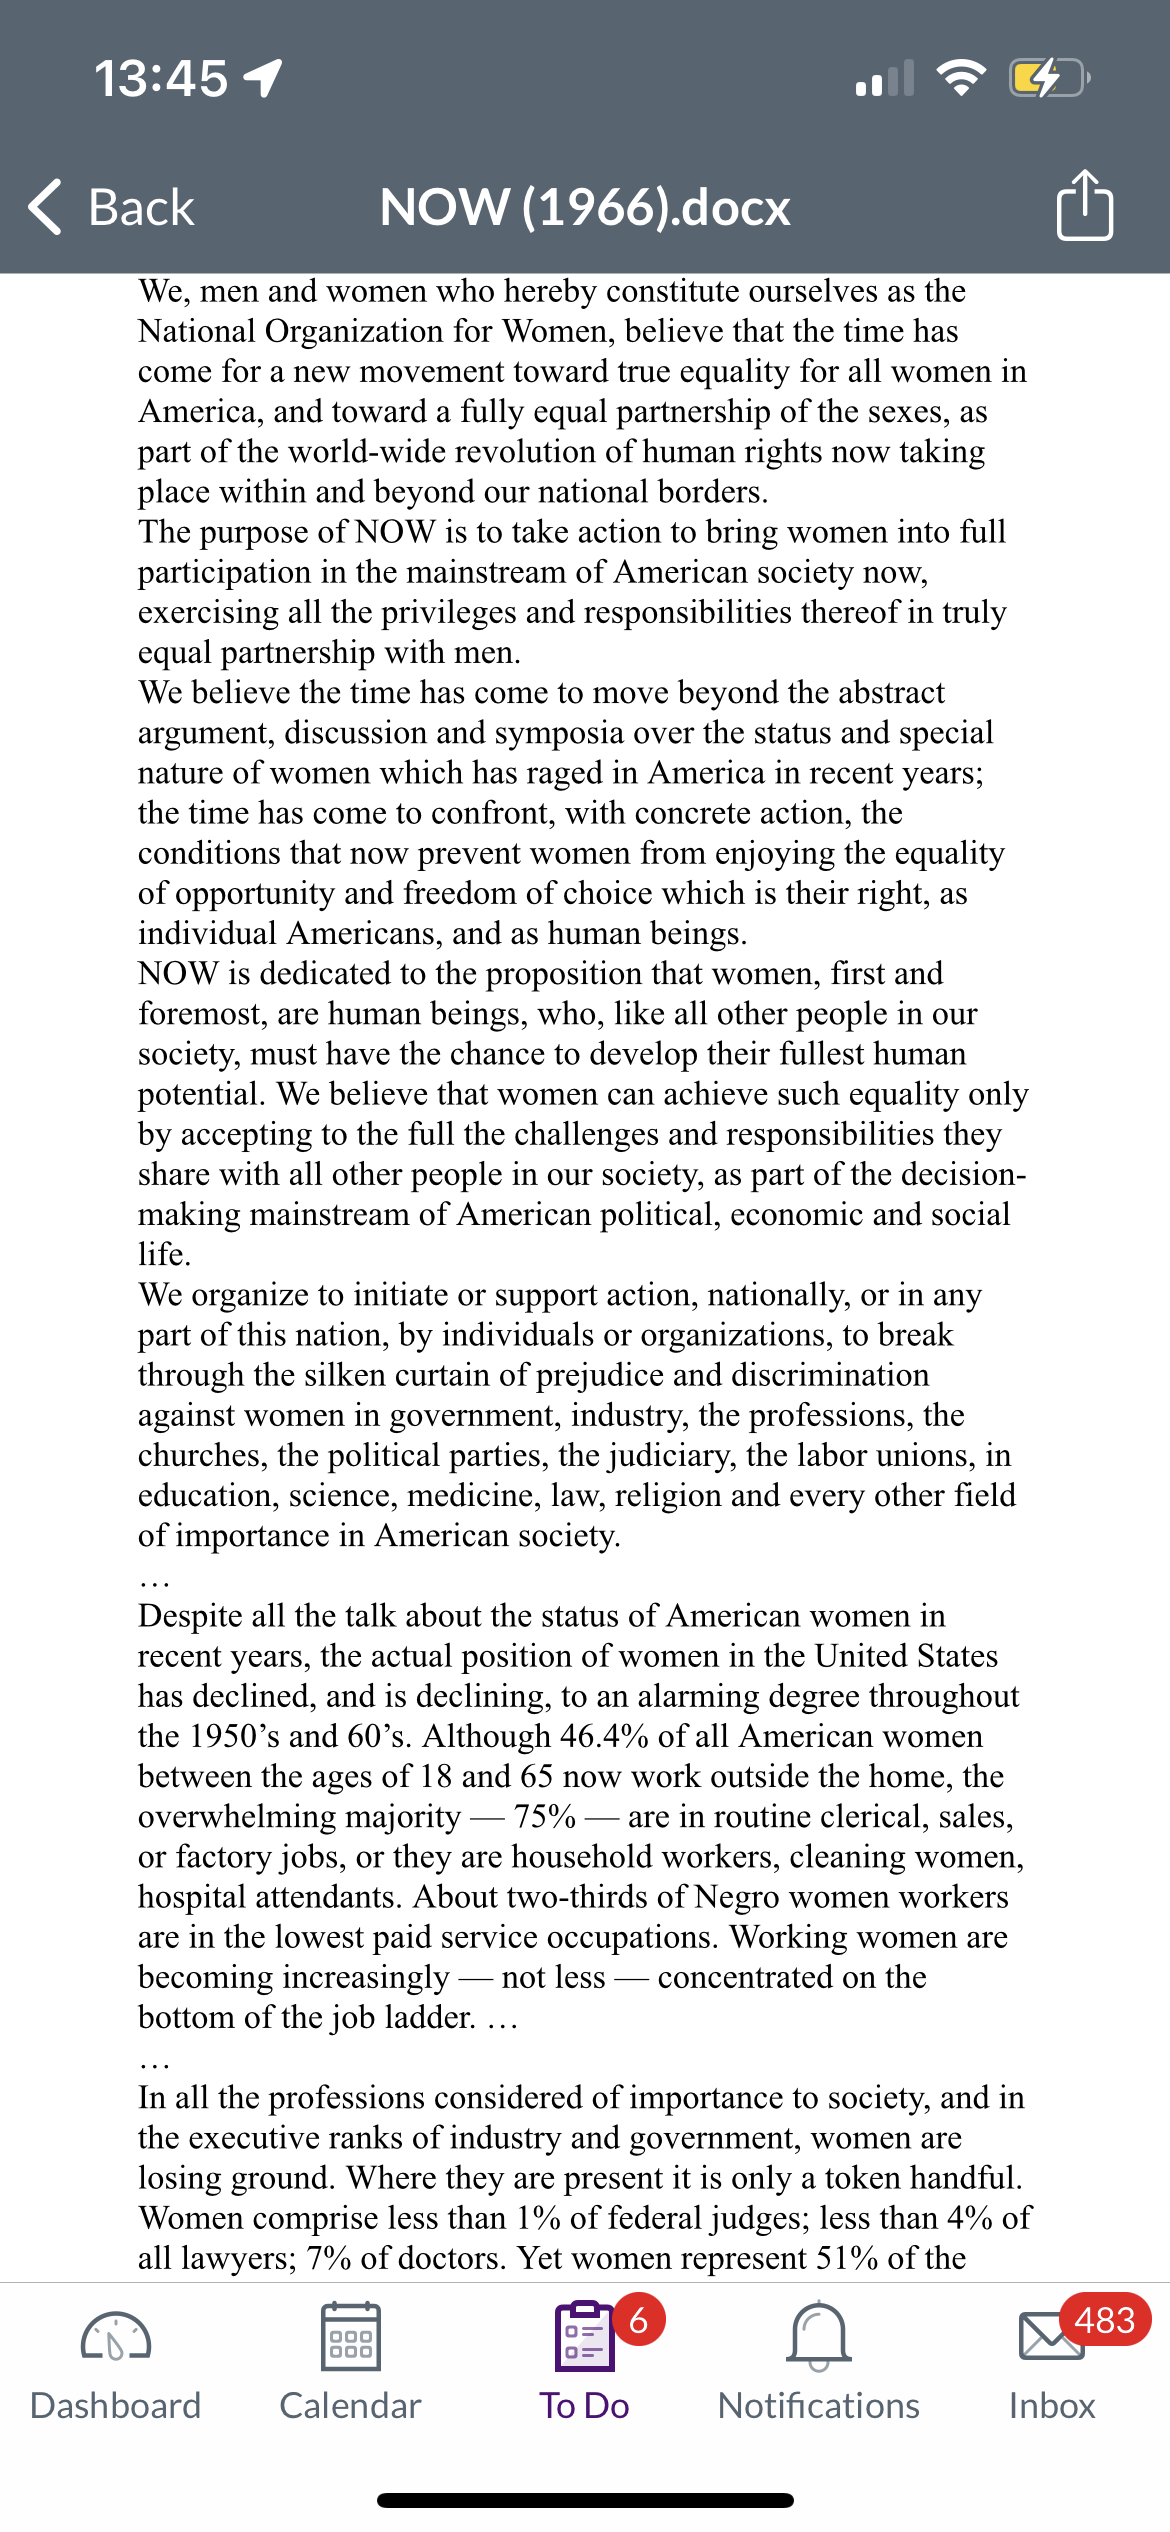 13:45 1
Back
NOW (1966).docx
We, men and women who hereby constitute ourselves as the
National Organization for Women, believe that the time has
come for a new movement toward true equality for all women in
America, and toward a fully equal partnership of the sexes, as
part of the world-wide revolution of human rights now taking
place within and beyond our national borders.
The purpose of NOW is to take action to bring women into full
participation in the mainstream of American society now,
exercising all the privileges and responsibilities thereof in truly
equal partnership with men.
We believe the time has come to move beyond the abstract
argument, discussion and symposia over the status and special
nature of women which has raged in America in recent years;
the time has come to confront, with concrete action, the
conditions that now prevent women from enjoying the equality
of opportunity and freedom of choice which is their right, as
individual Americans, and as human beings.
NOW is dedicated to the proposition that women, first and
foremost, are human beings, who, like all other people in our
society, must have the chance to develop their fullest human
potential. We believe that women can achieve such equality only
by accepting to the full the challenges and responsibilities they
share with all other people in our society, as part of the decision-
making mainstream of American political, economic and social
life.
We organize to initiate or support action, nationally, or in any
part of this nation, by individuals or organizations, to break
through the silken curtain of prejudice and discrimination
against women in government, industry, the professions, the
churches, the political parties, the judiciary, the labor unions, in
education, science, medicine, law, religion and every other field
of importance in American society.
Despite all the talk about the status of American women in
recent years, the actual position of women in the United States
has declined, and is declining, to an alarming degree throughout
the 1950's and 60's. Although 46.4% of all American women
between the ages of 18 and 65 now work outside the home, the
overwhelming majority — 75% - are in routine clerical, sales,
or factory jobs, or they are household workers, cleaning women,
hospital attendants. About two-thirds of Negro women workers
are in the lowest paid service occupations. Working women are
becoming increasingly not less concentrated on the
bottom of the job ladder. ...
In all the professions considered of importance to society, and in
the executive ranks of industry and government, women are
losing ground. Where they are present it is only a token handful.
Women comprise less than 1% of federal judges; less than 4% of
all lawyers; 7% of doctors. Yet women represent 51% of the
6
Dashboard
000
000
Calendar
To Do
Notifications
483
Inbox